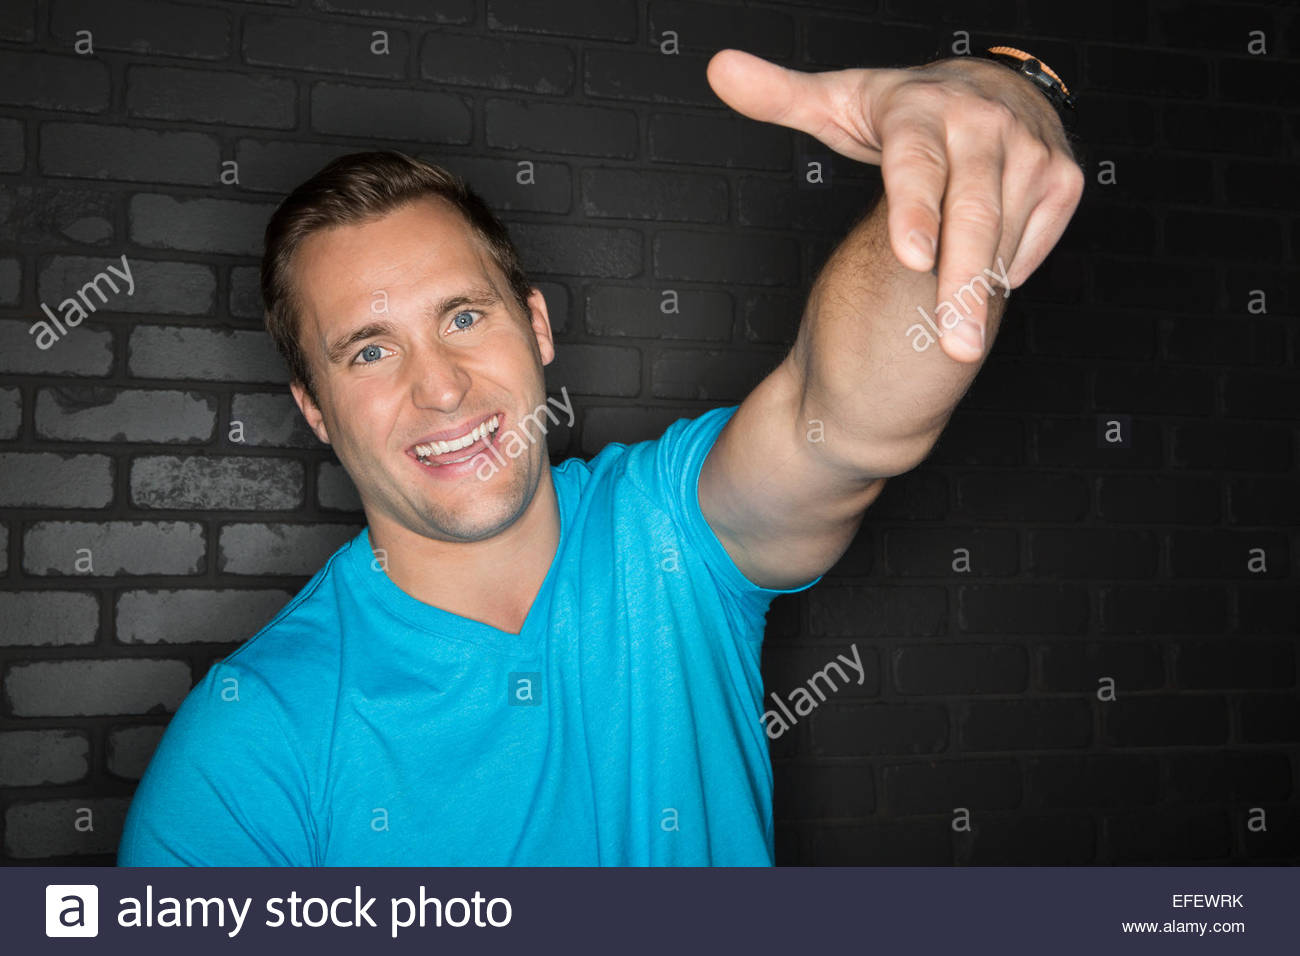 Portrait of cool man in blue shirt gesturing Stock Photo